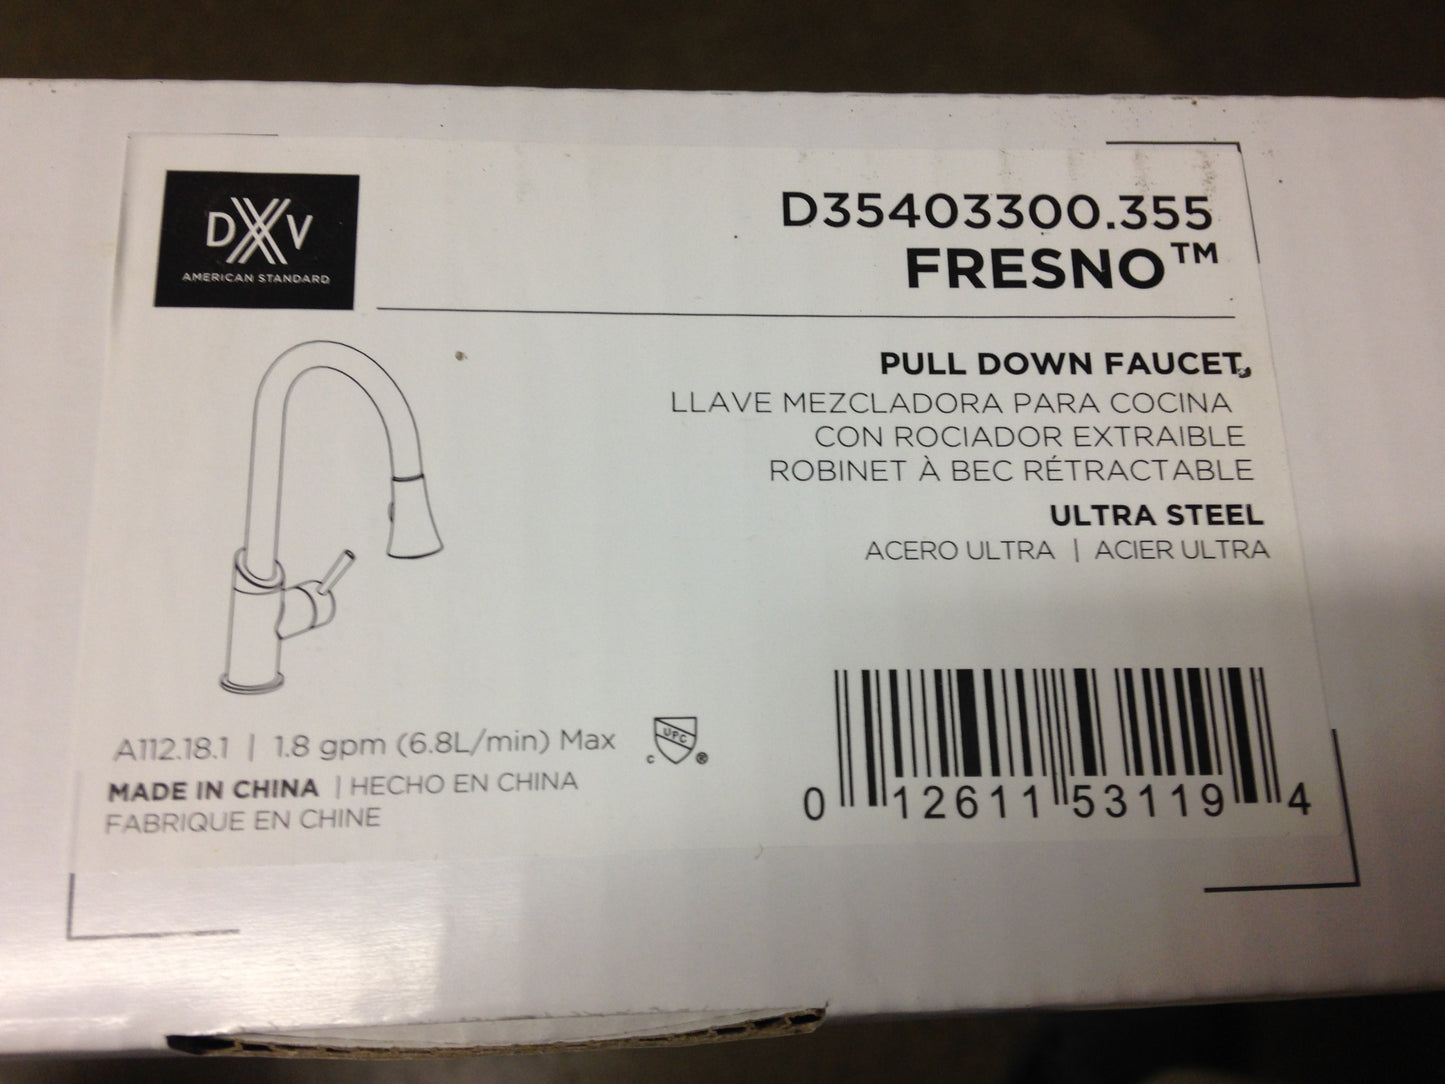 "FRESNO" PULL DOWN FAUCET, ULTRA STEEL